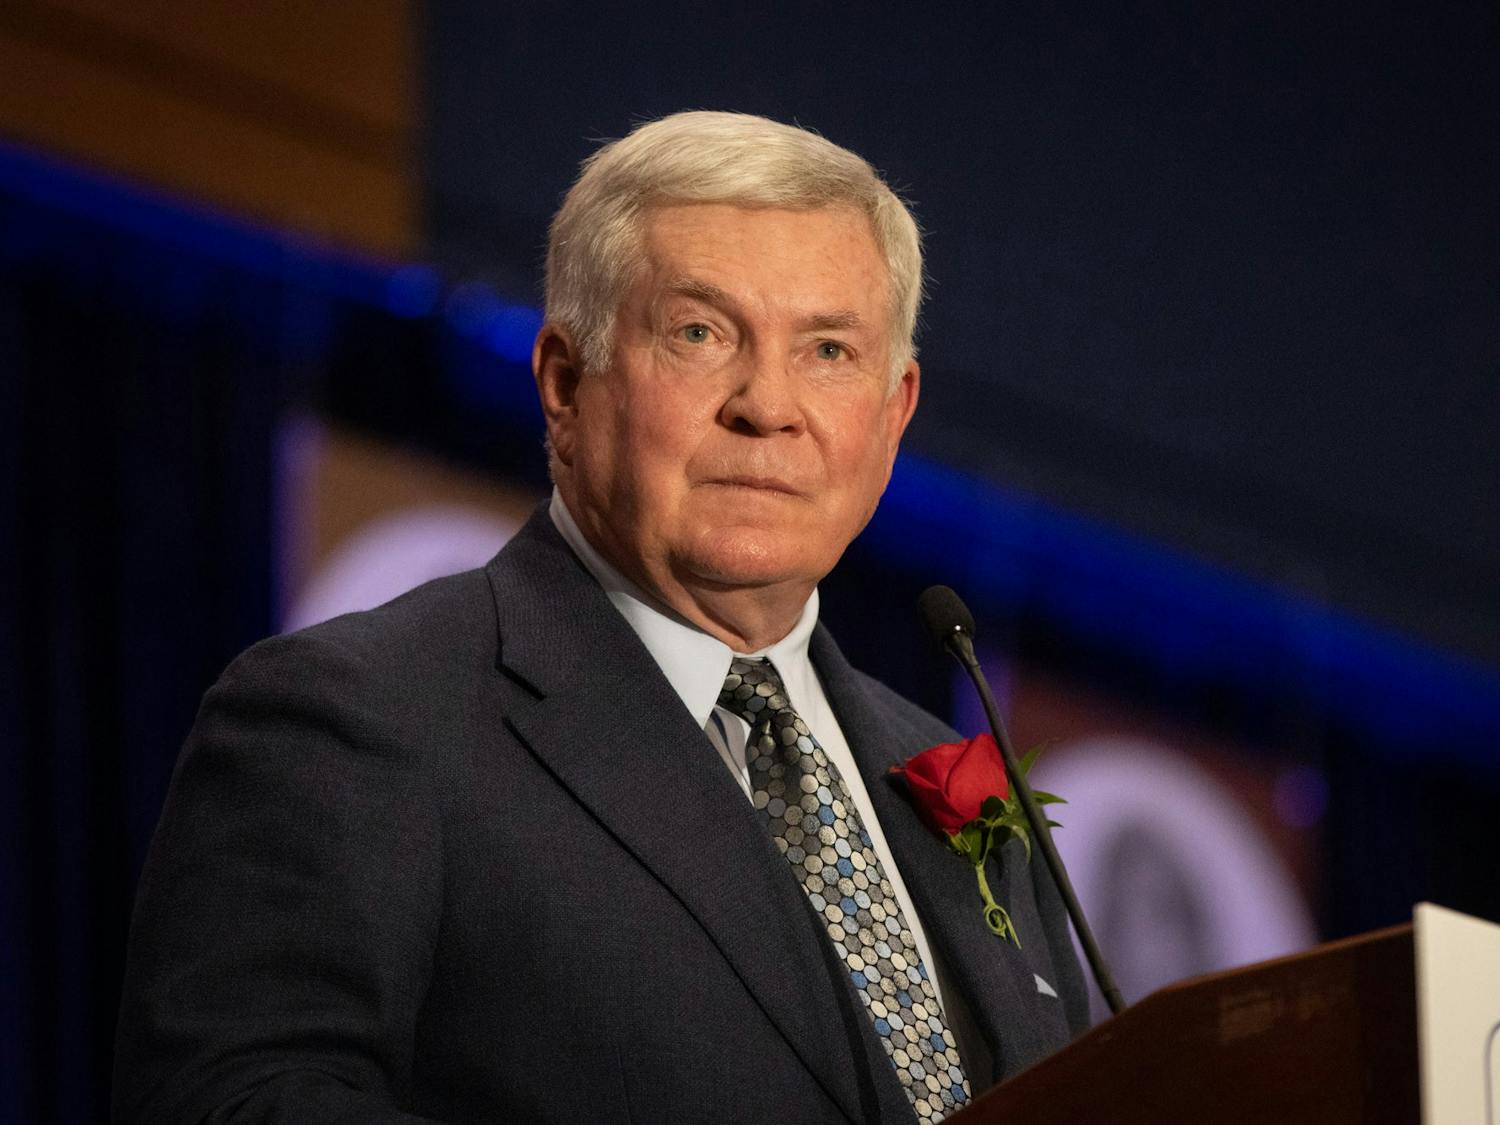 Mack Brown, head coach of UNC's football team, delivers an acceptance speech at the North Carolina Sports Hall of Fame induction ceremony Friday.